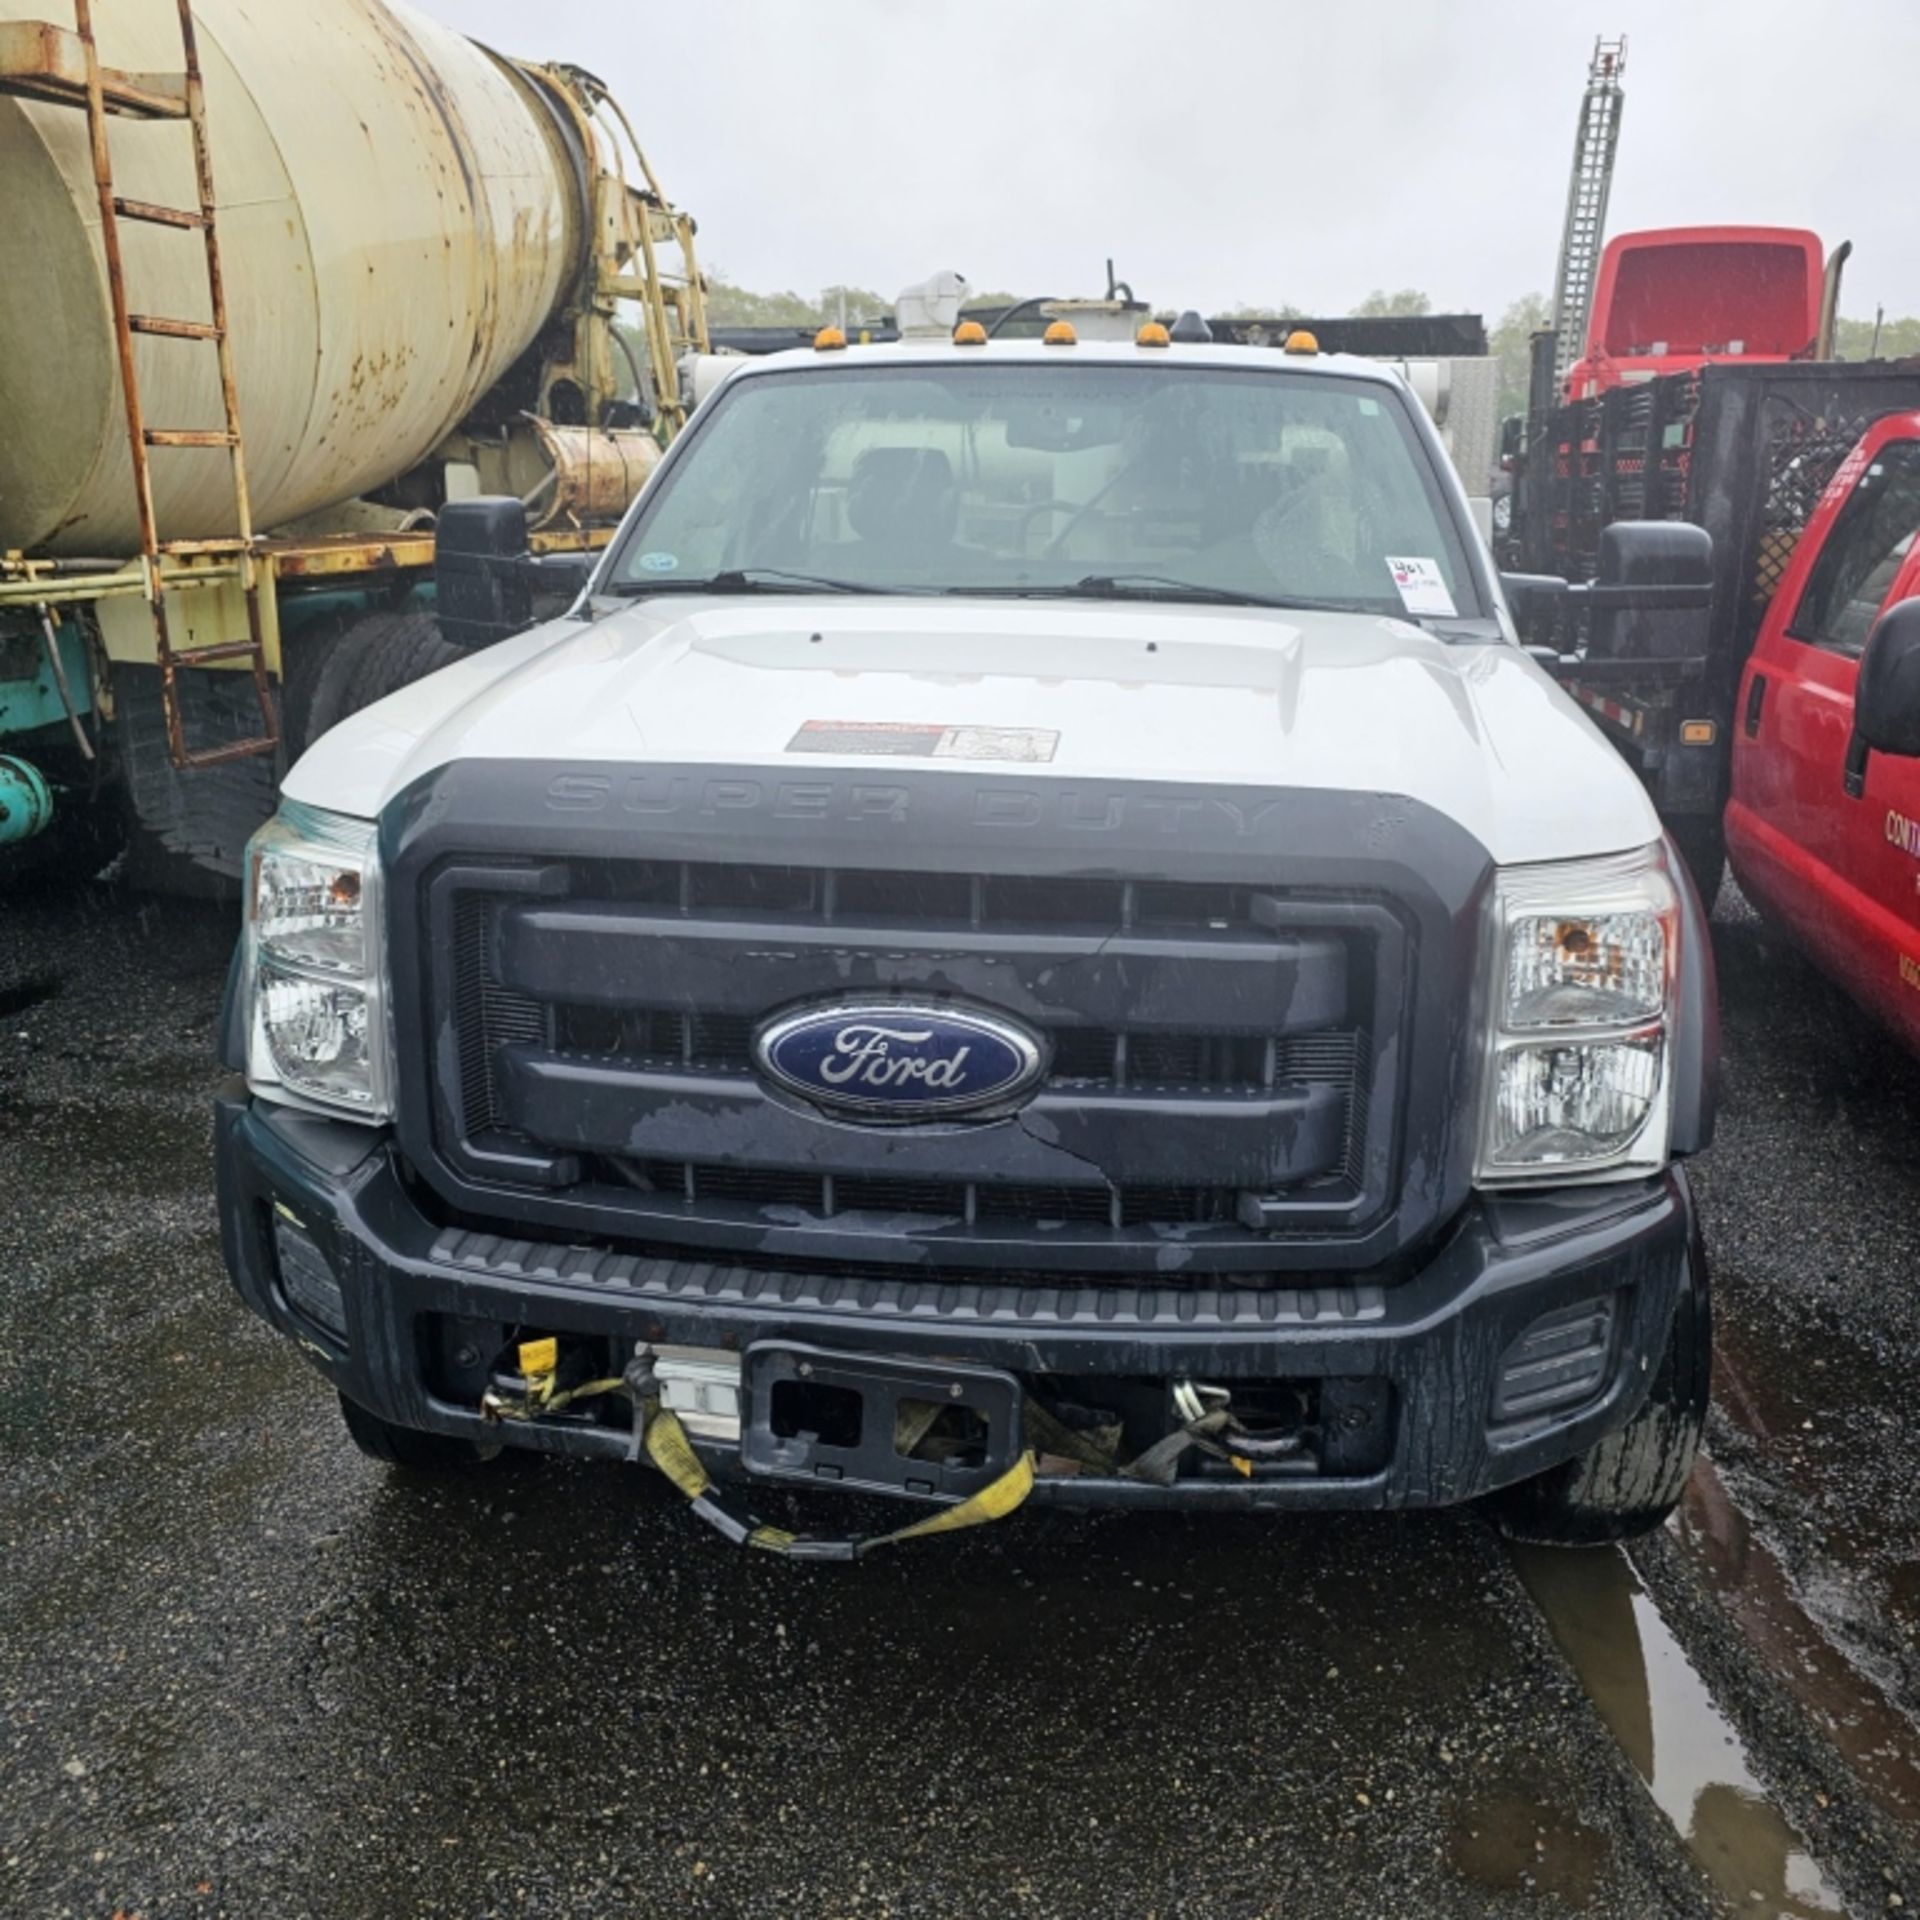 2012 Ford F450 Utility Body - Image 3 of 9